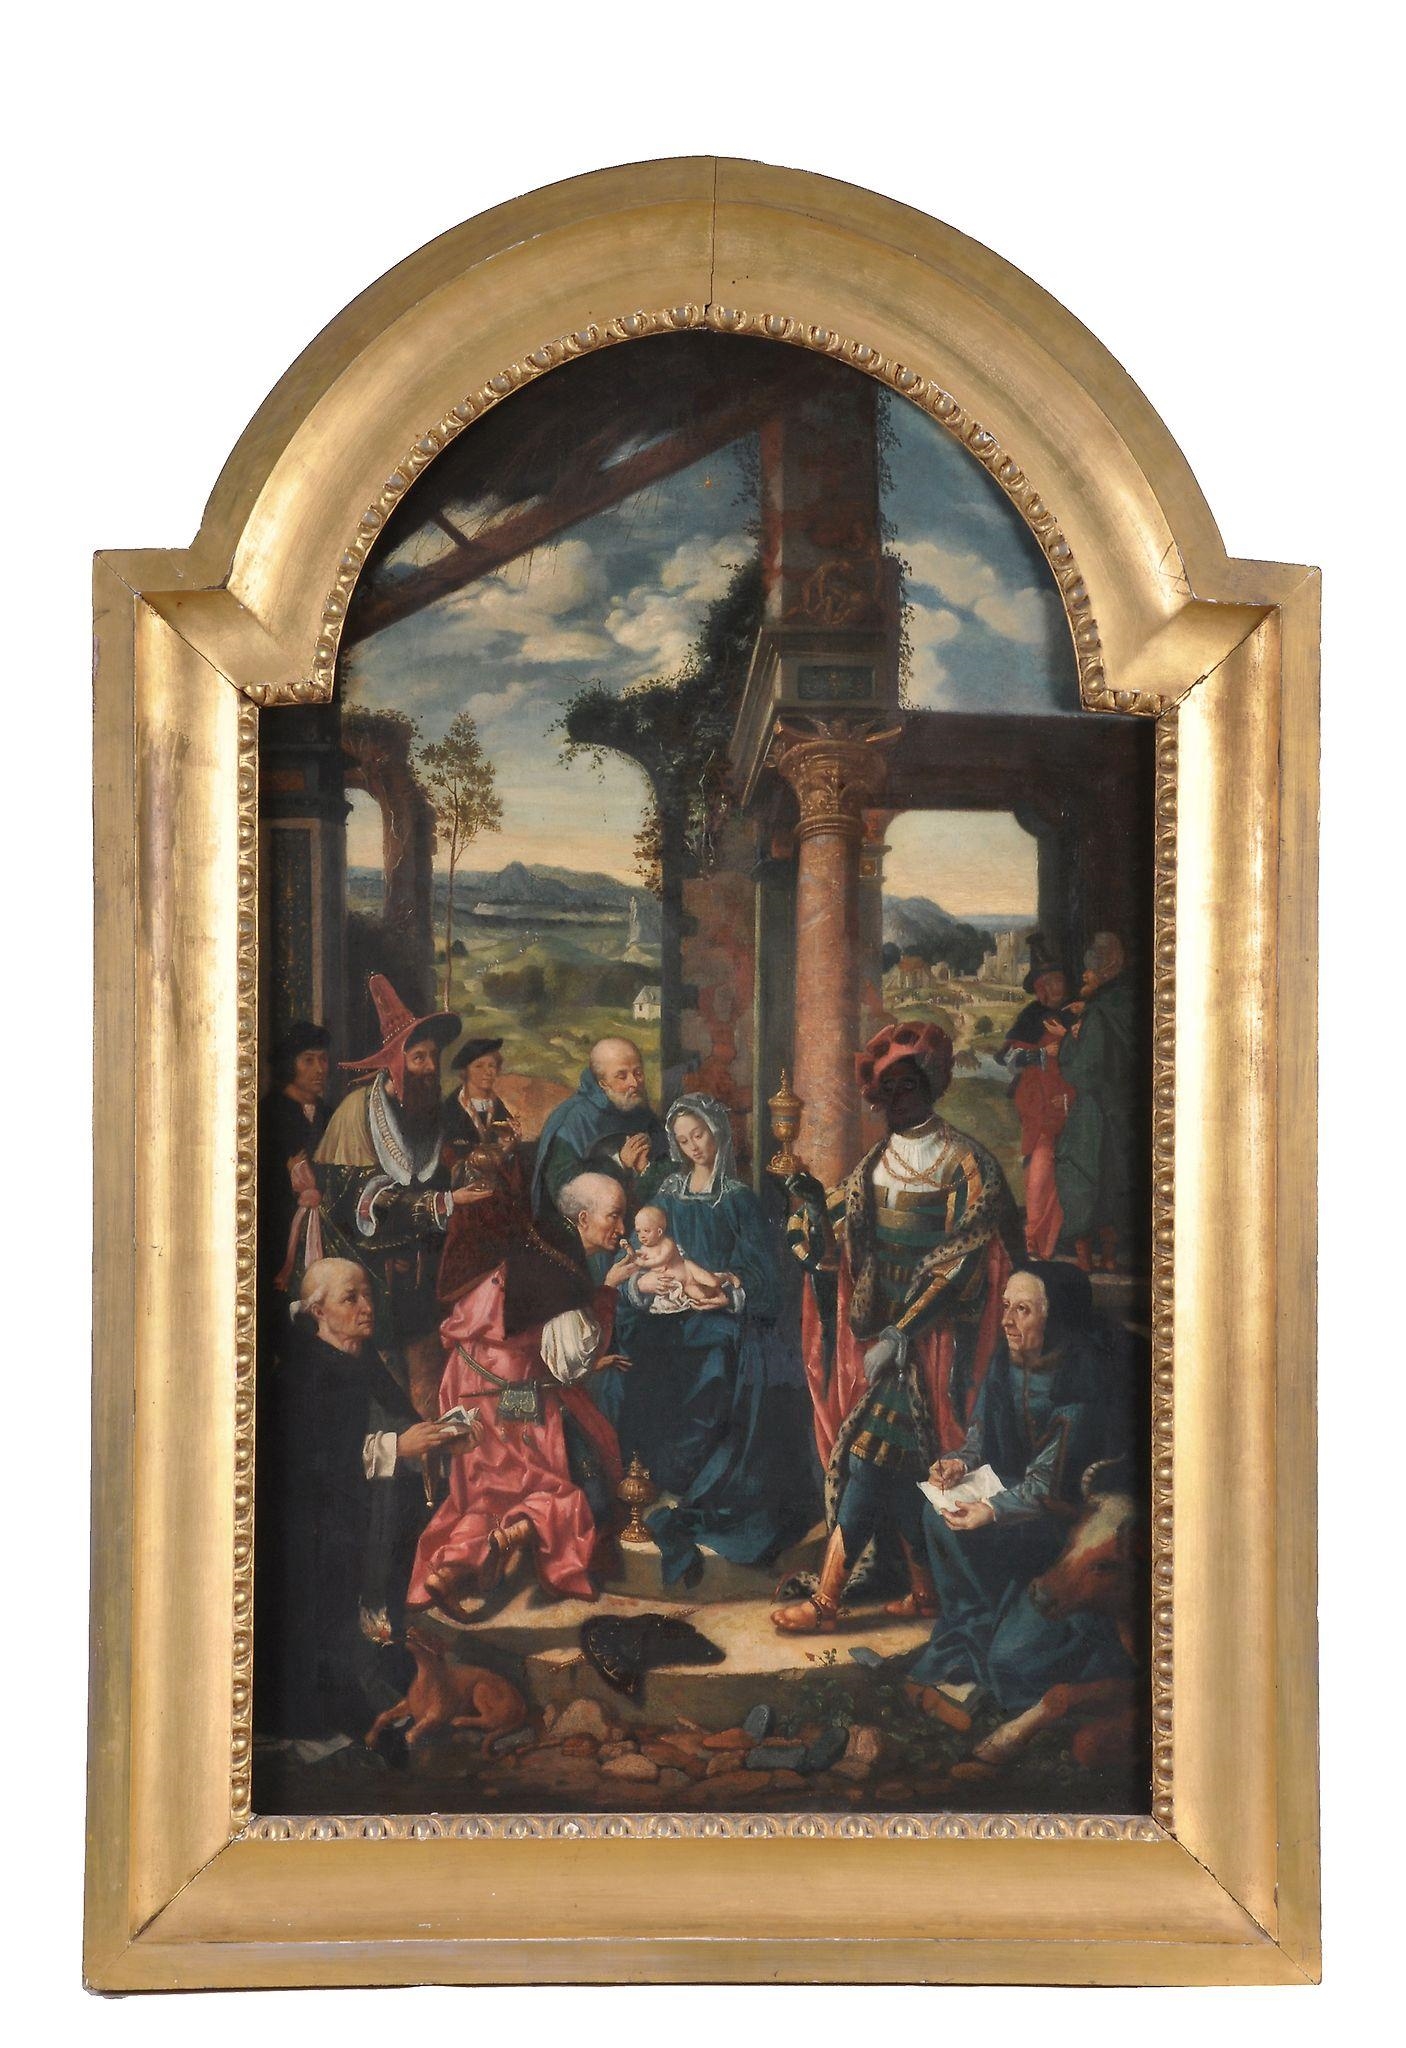 The Adoration of the Magi by Joos van Cleve